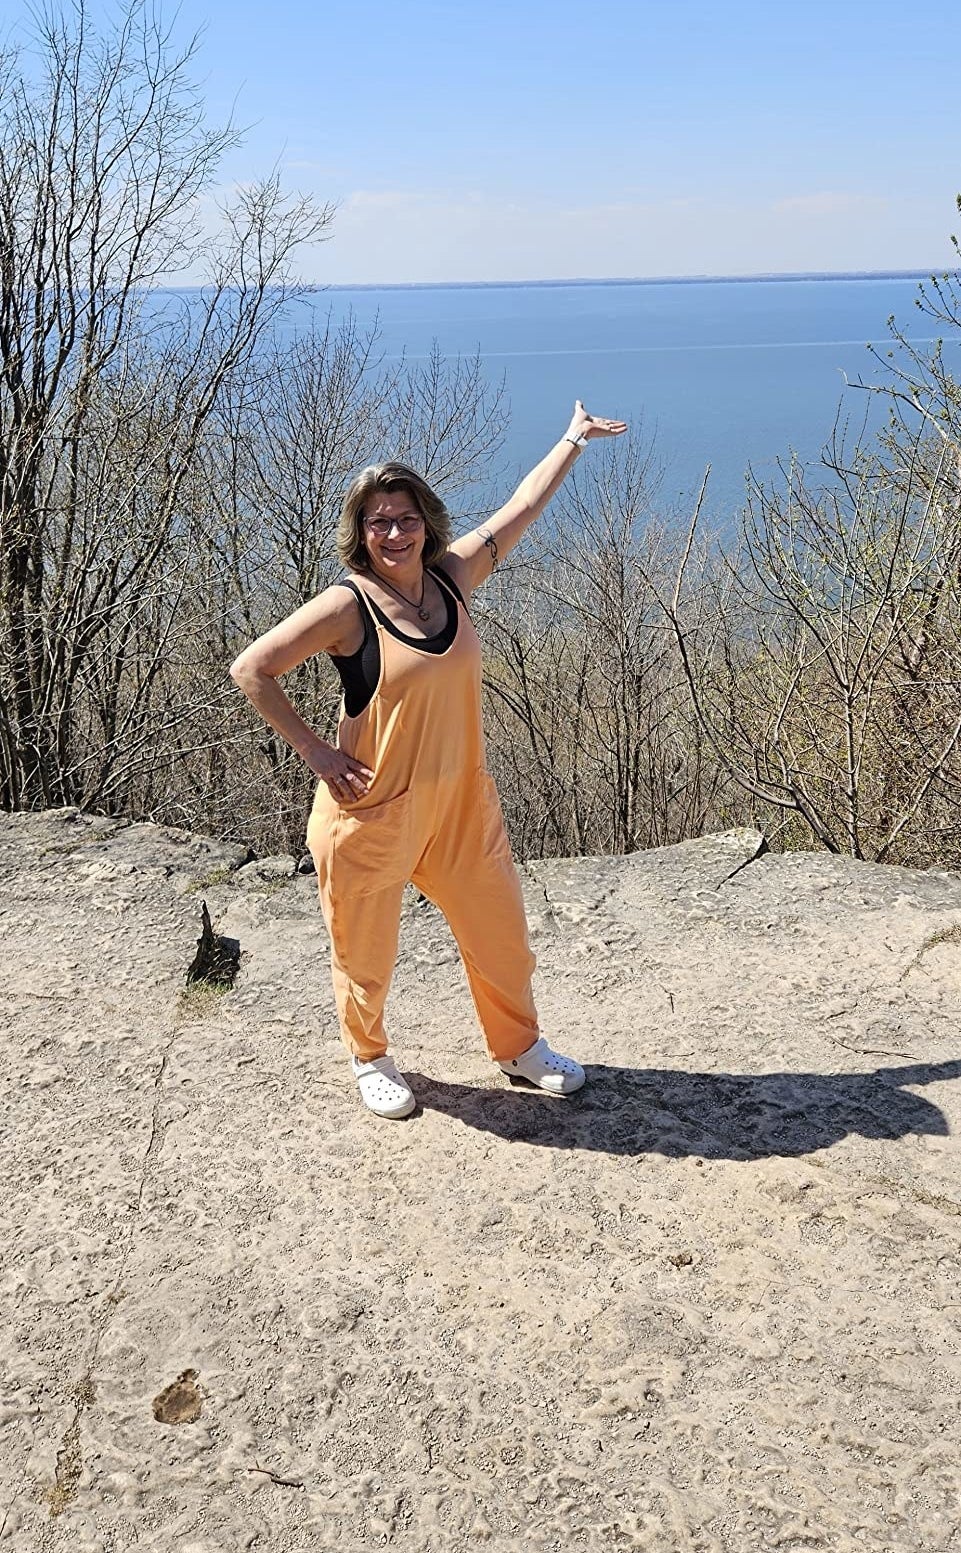 Reviewer posing on mountain in front of water in orange jumper